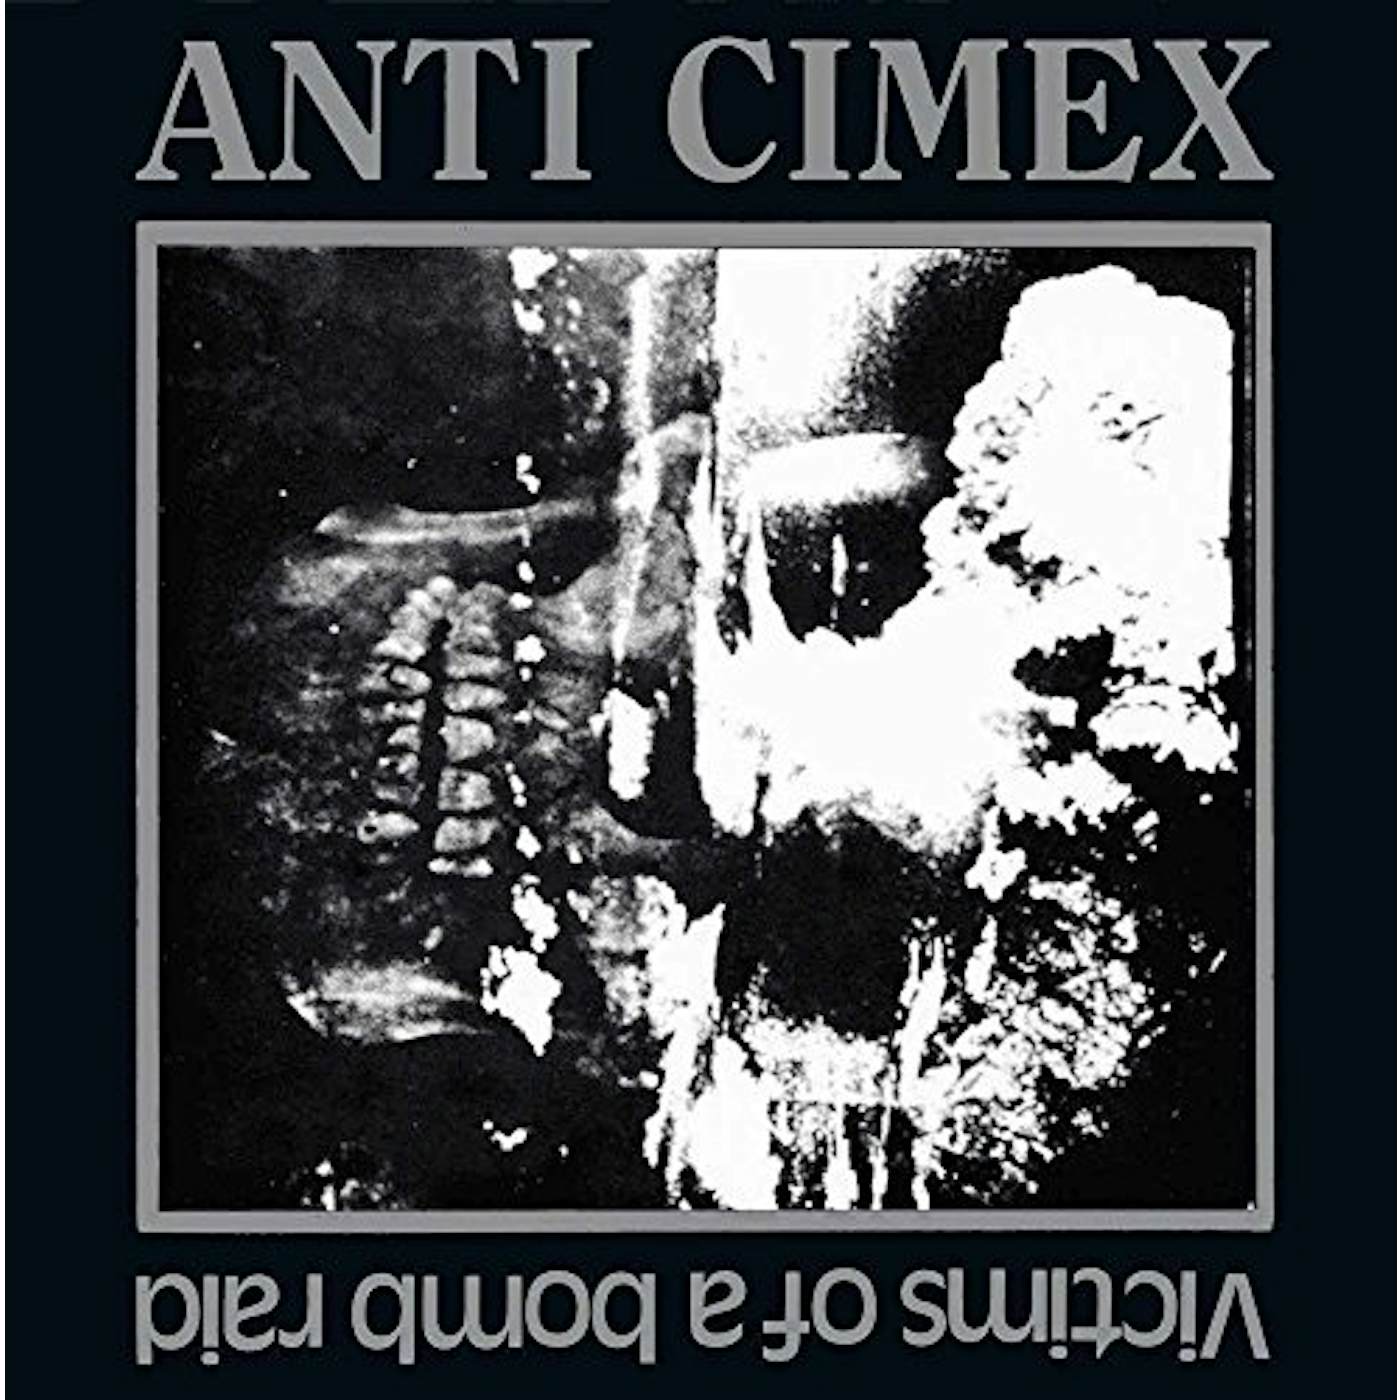 Anti Cimex VICTIMS OF A BOMB RAID - THE DISCOGRAPHY CD